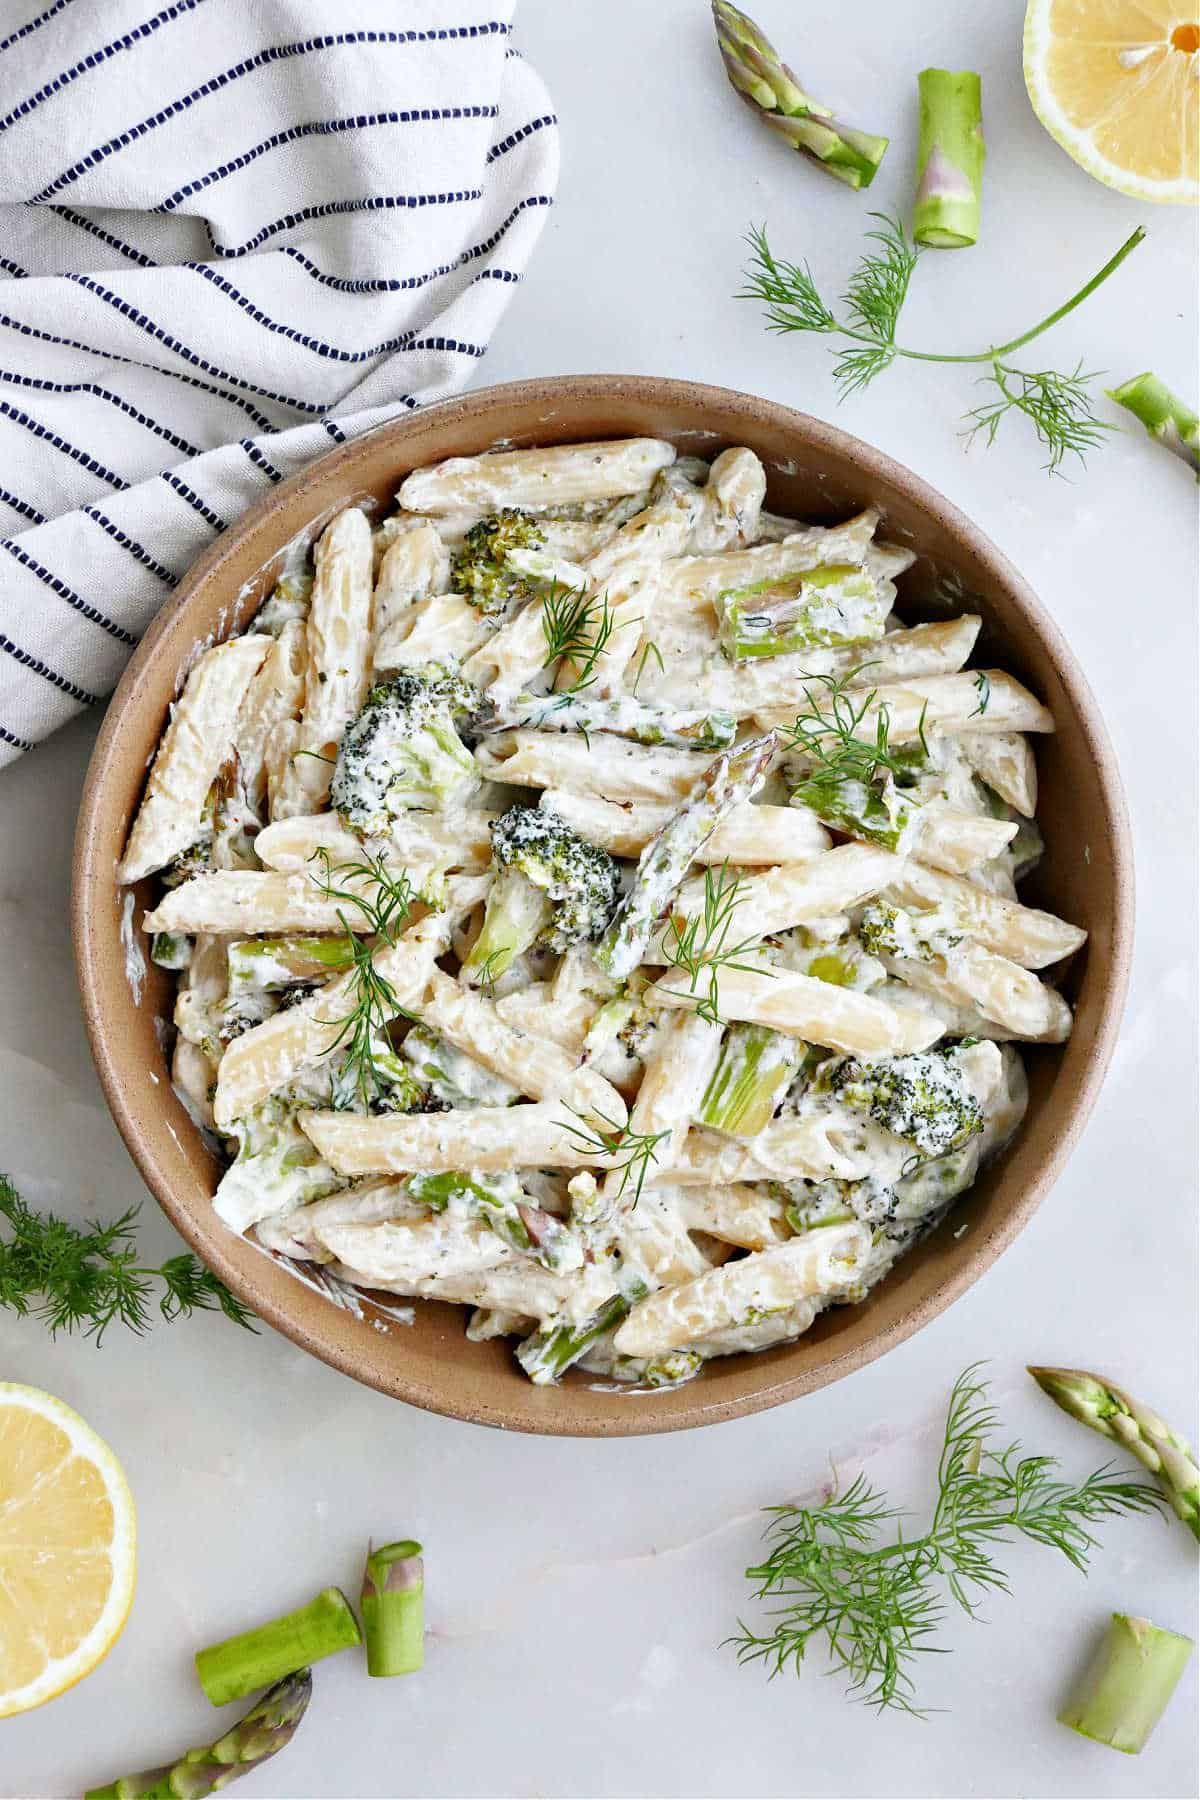 A large bowl of asparagus broccoli pasta garnished with herbs next to a striped dish towel.